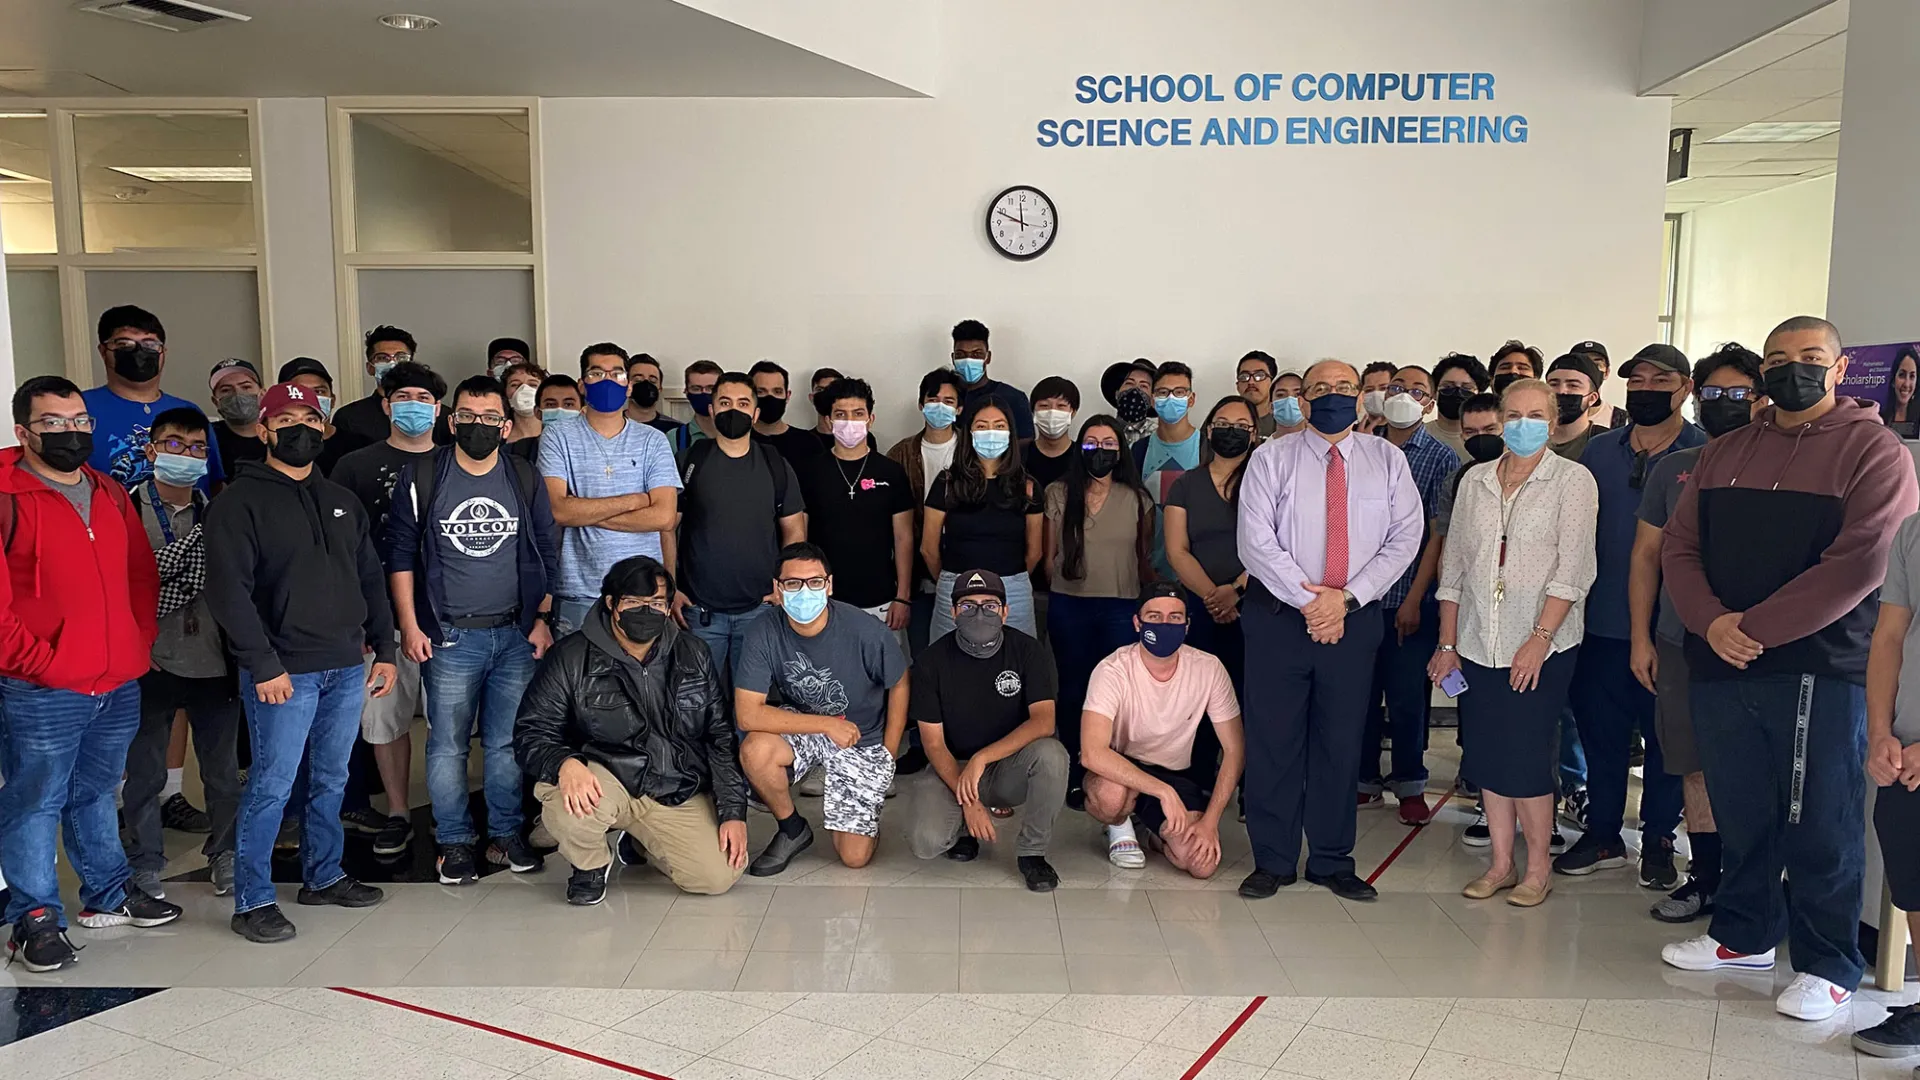 Faculty, students and staff at the CSUSB School of Computer Science & Engineering